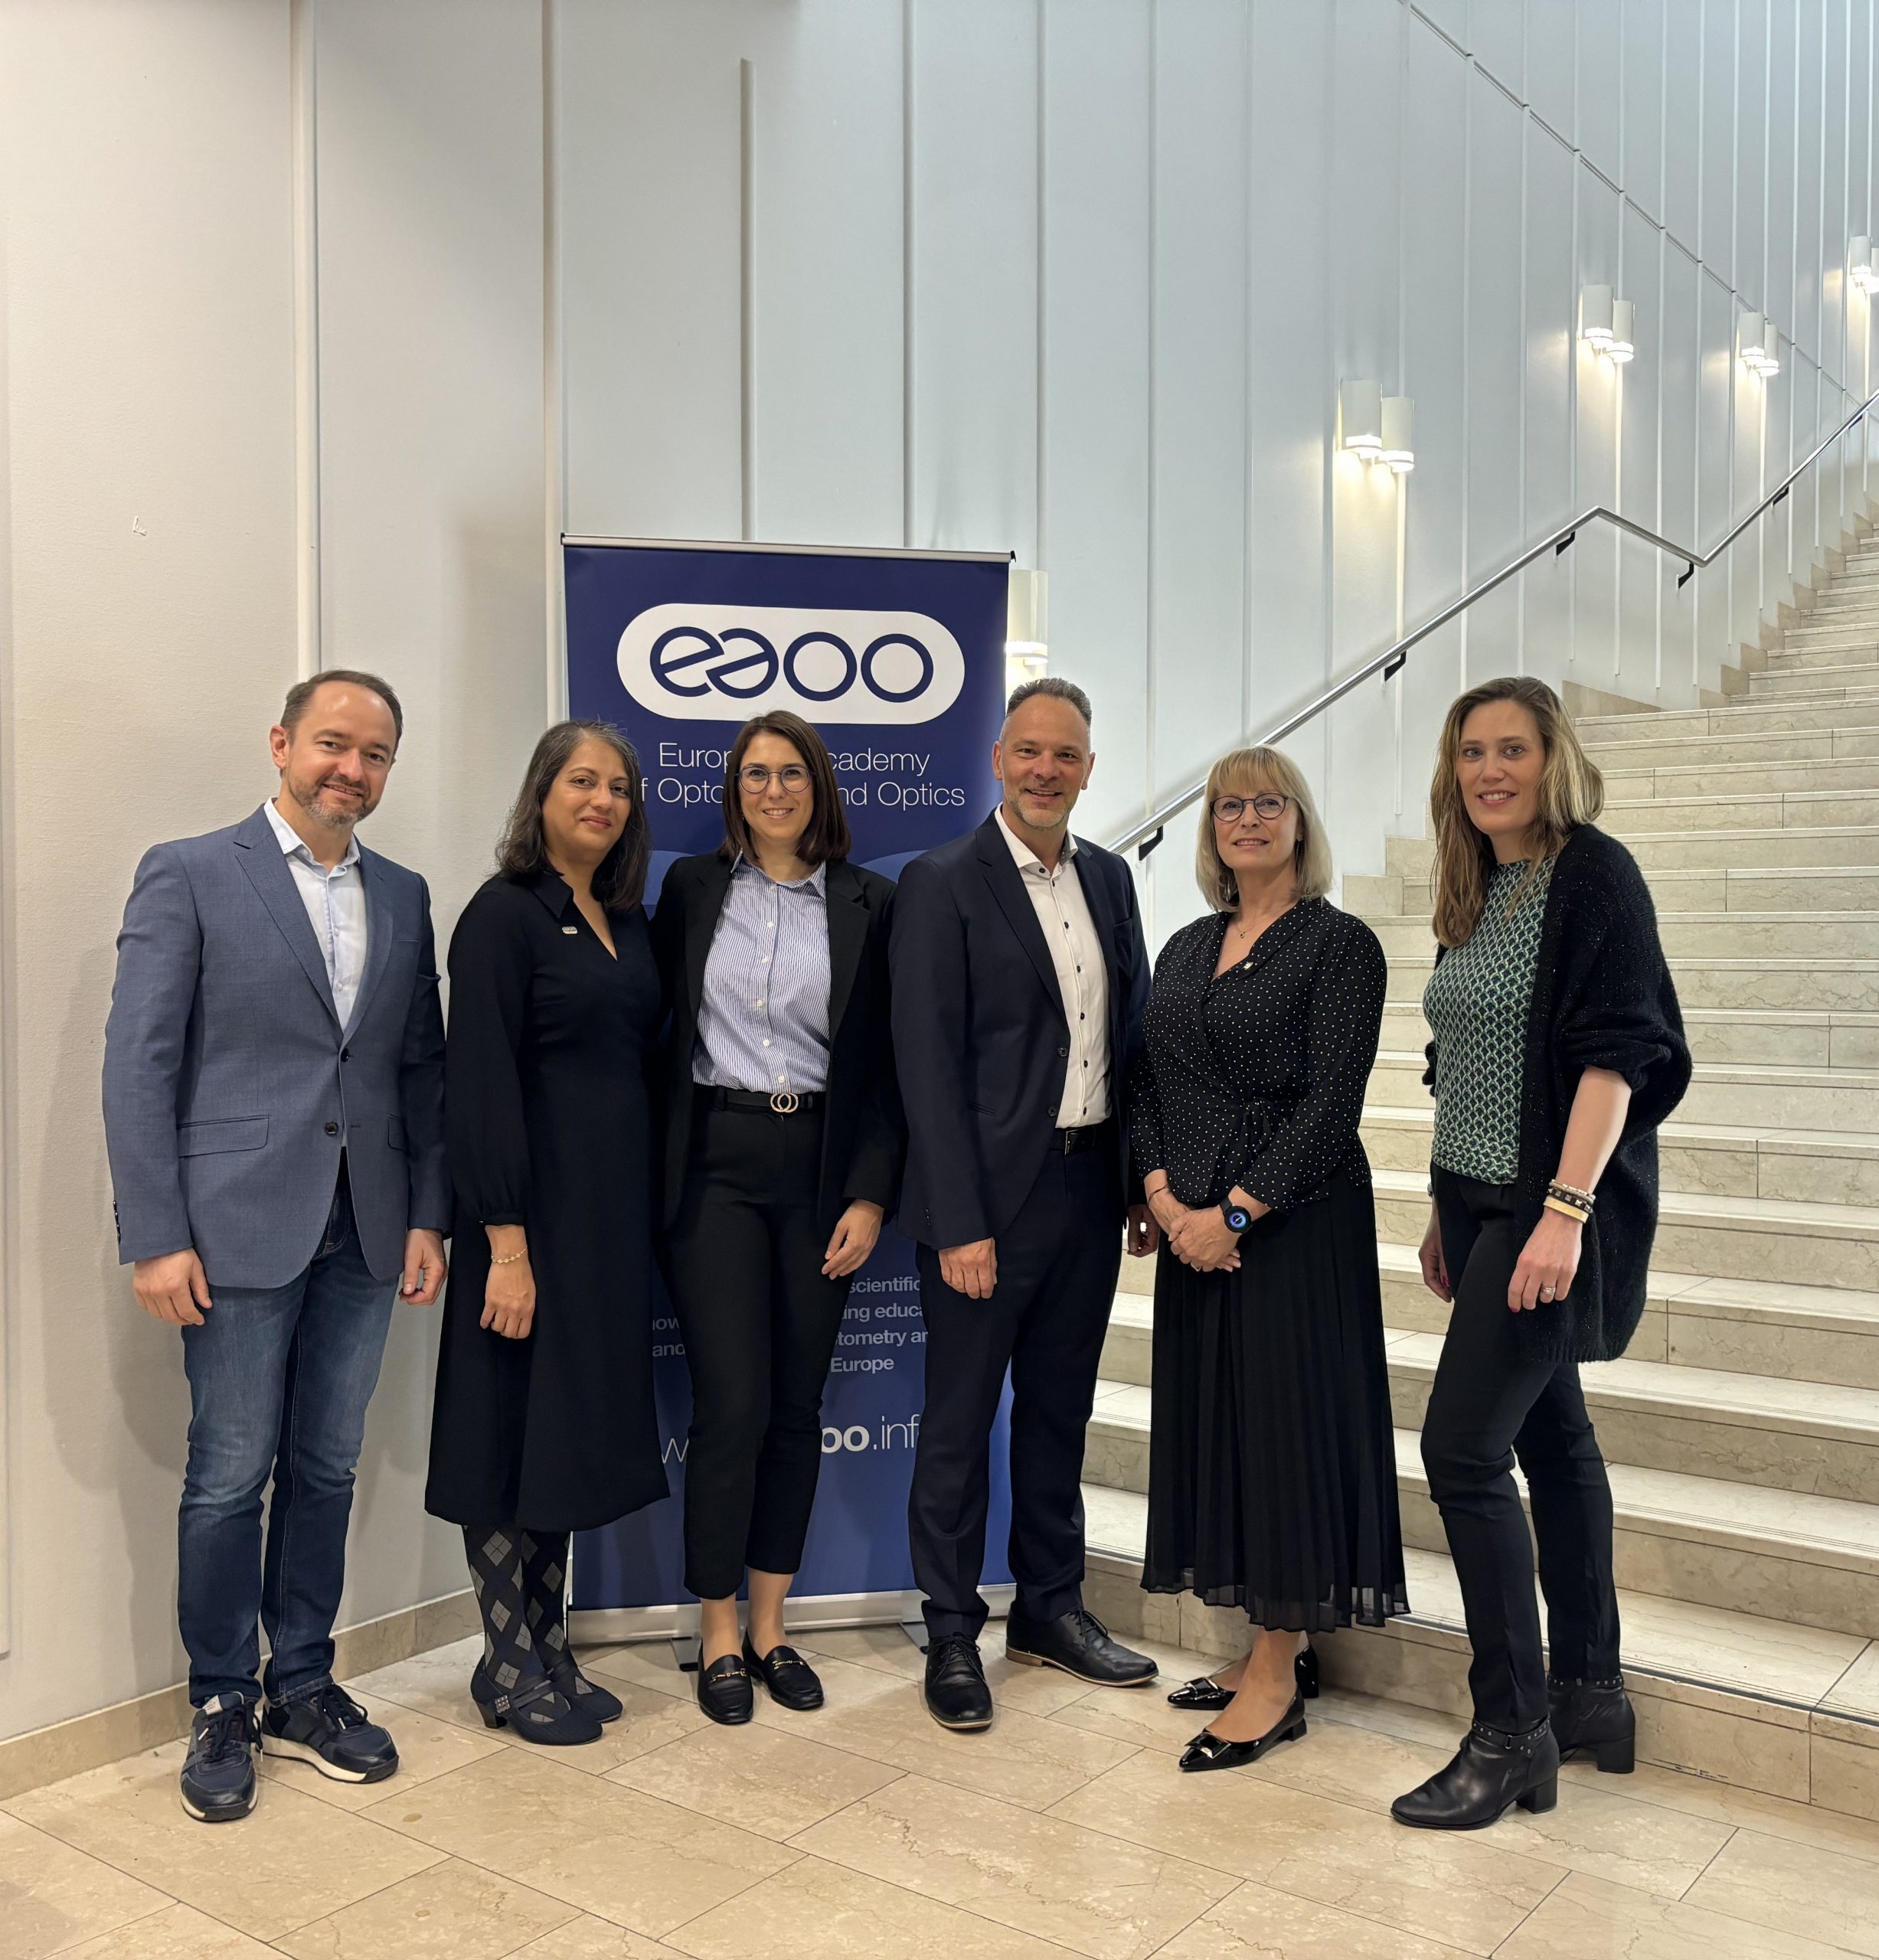 F.l.t.r.: Prof. José Manuel Gonzalez-Meijome (VP of EAOO), Rupal Lovell-Patel (President of EAOO), Kristina Mihić (Academy Manager EAOO), Pascal Blaser (Global Professional Affairs Manager at HOYA), Liliana Stankova (Immediate past President of EAOO), Marianne Goldwaser (Global Professional Affairs Manager at HOYA). Picture: HOYA